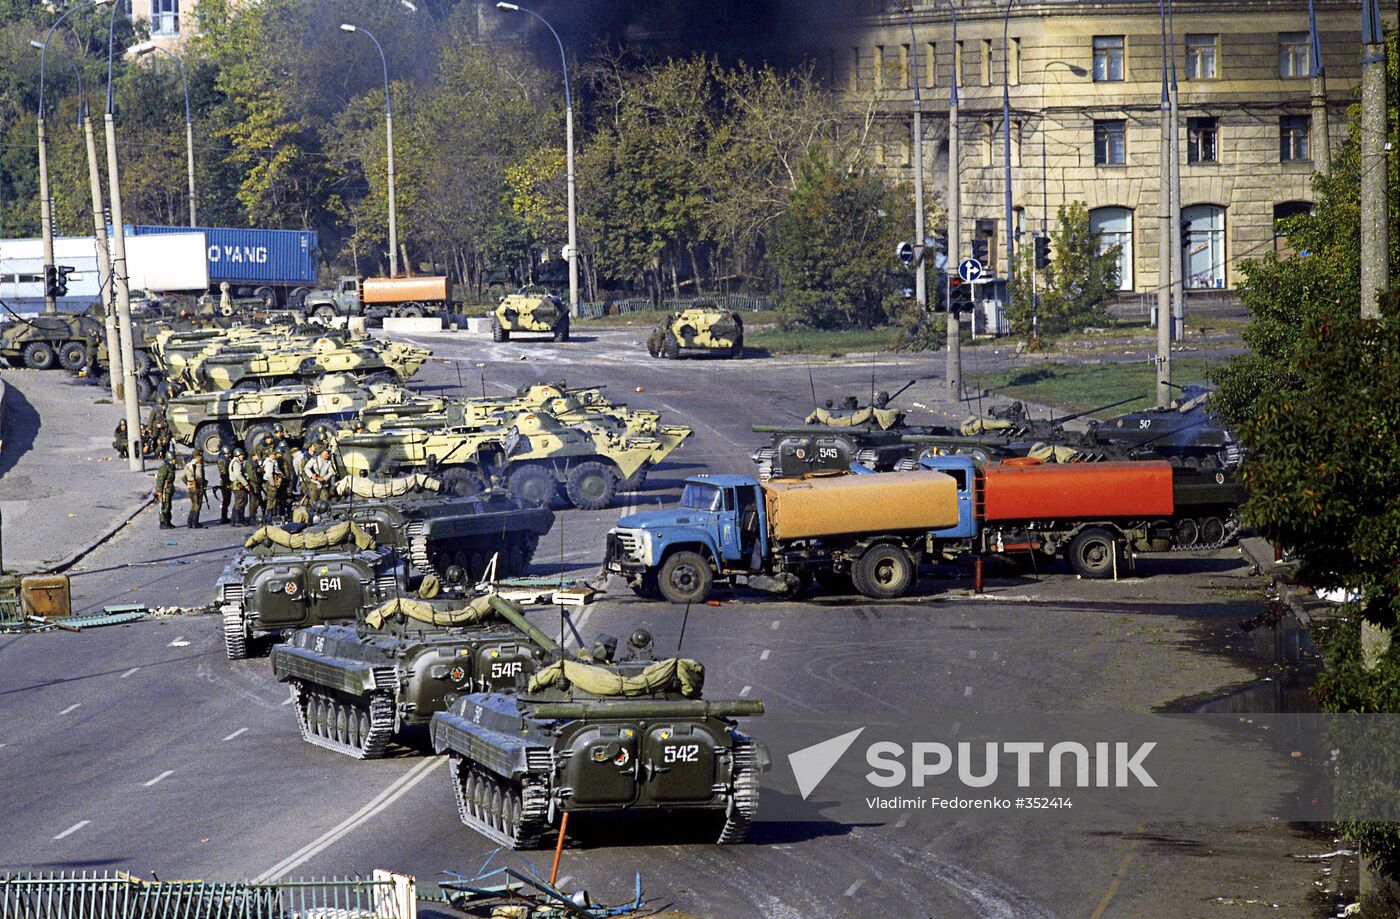 Military equipment in Moscow